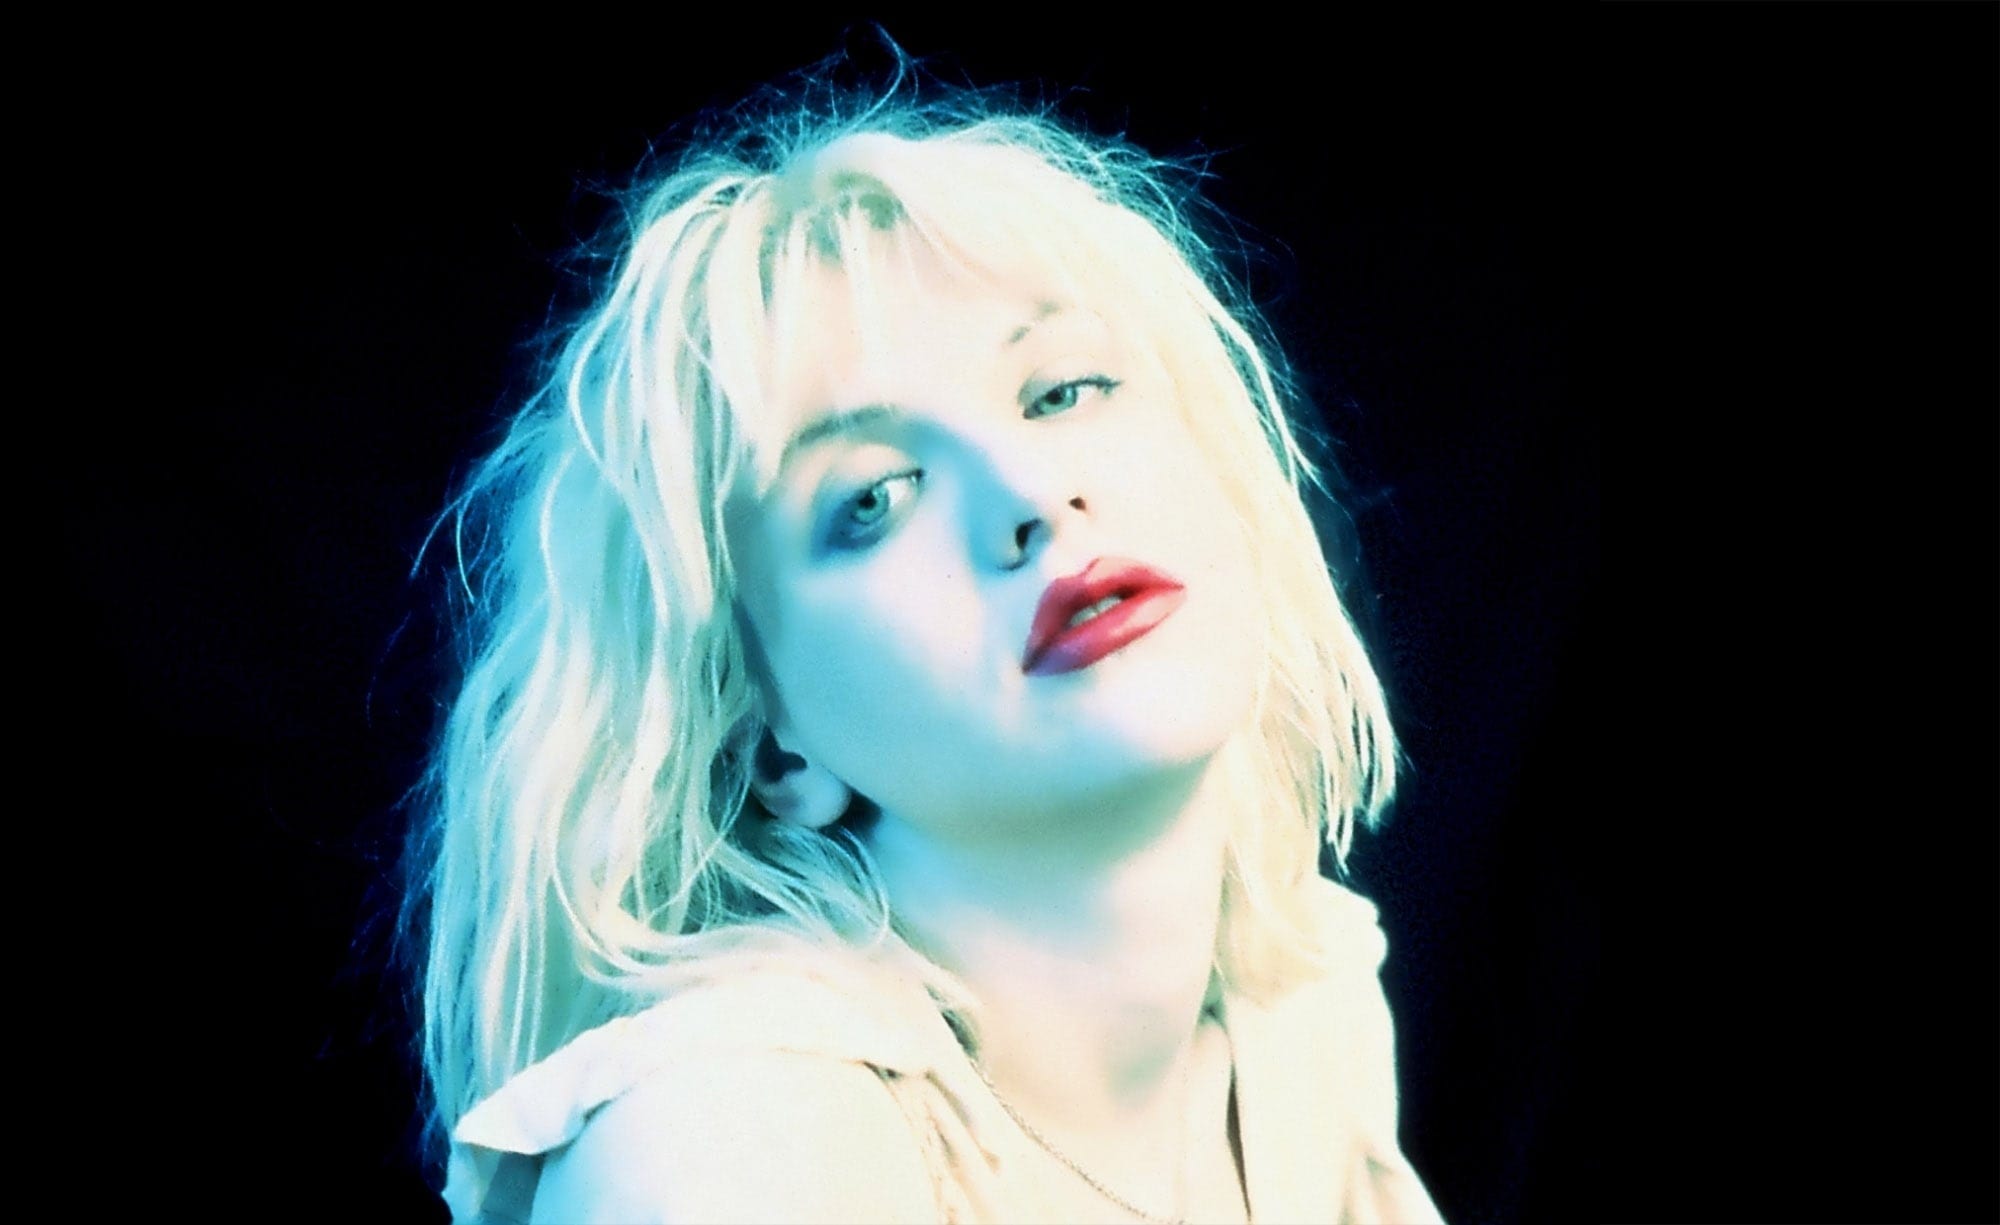 Courtney Love's attitude has been evident throughout her eclectic acting career. Here’s our ranking of her ten best roles now.